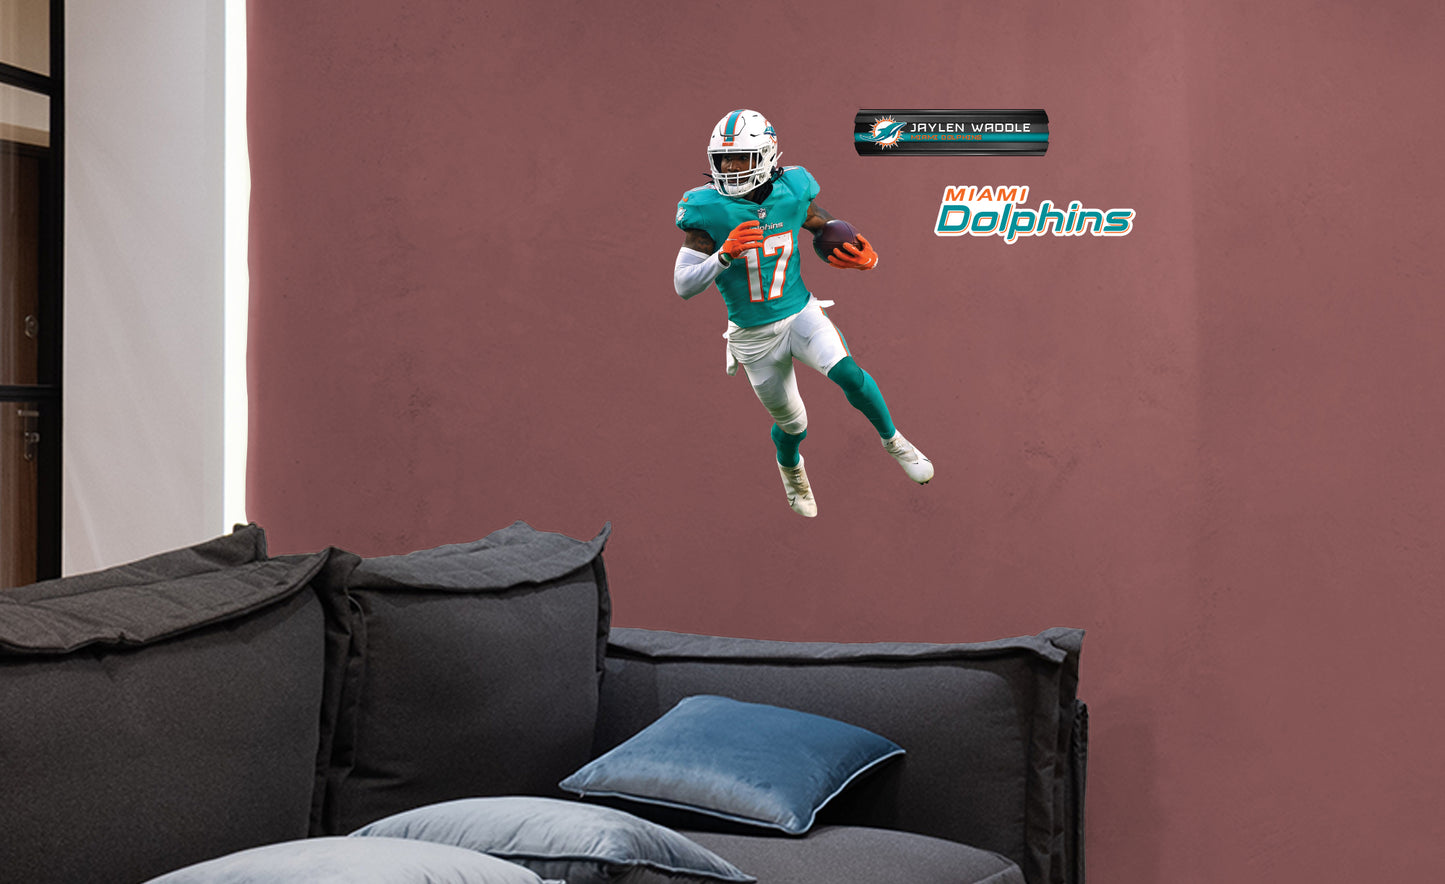 Miami Dolphins: Jaylen Waddle 2021        - Officially Licensed NFL Removable     Adhesive Decal